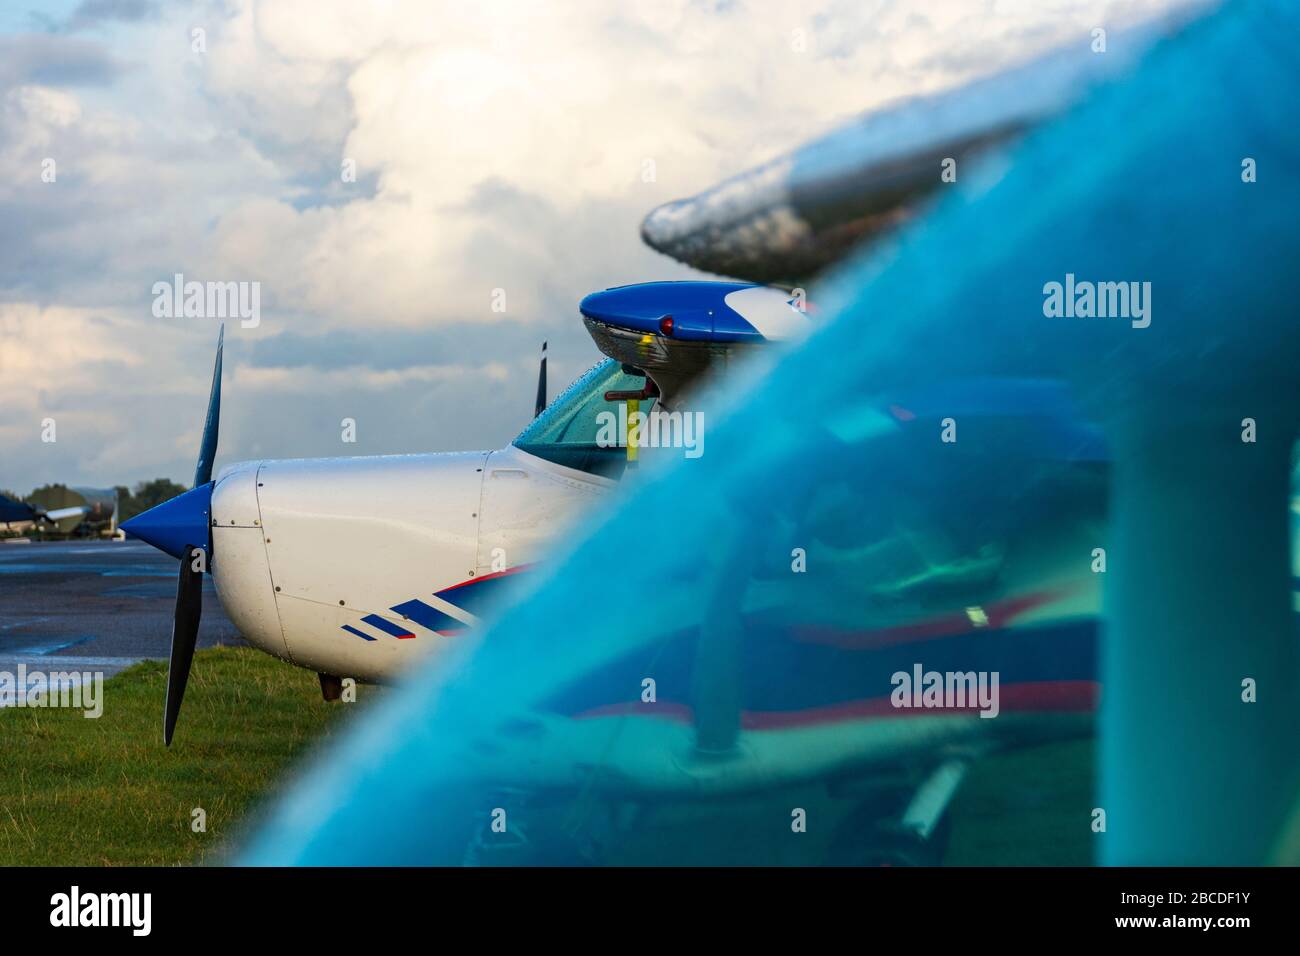 Abstract close up view across the windscreen of a Cessna aircraft Stock Photo